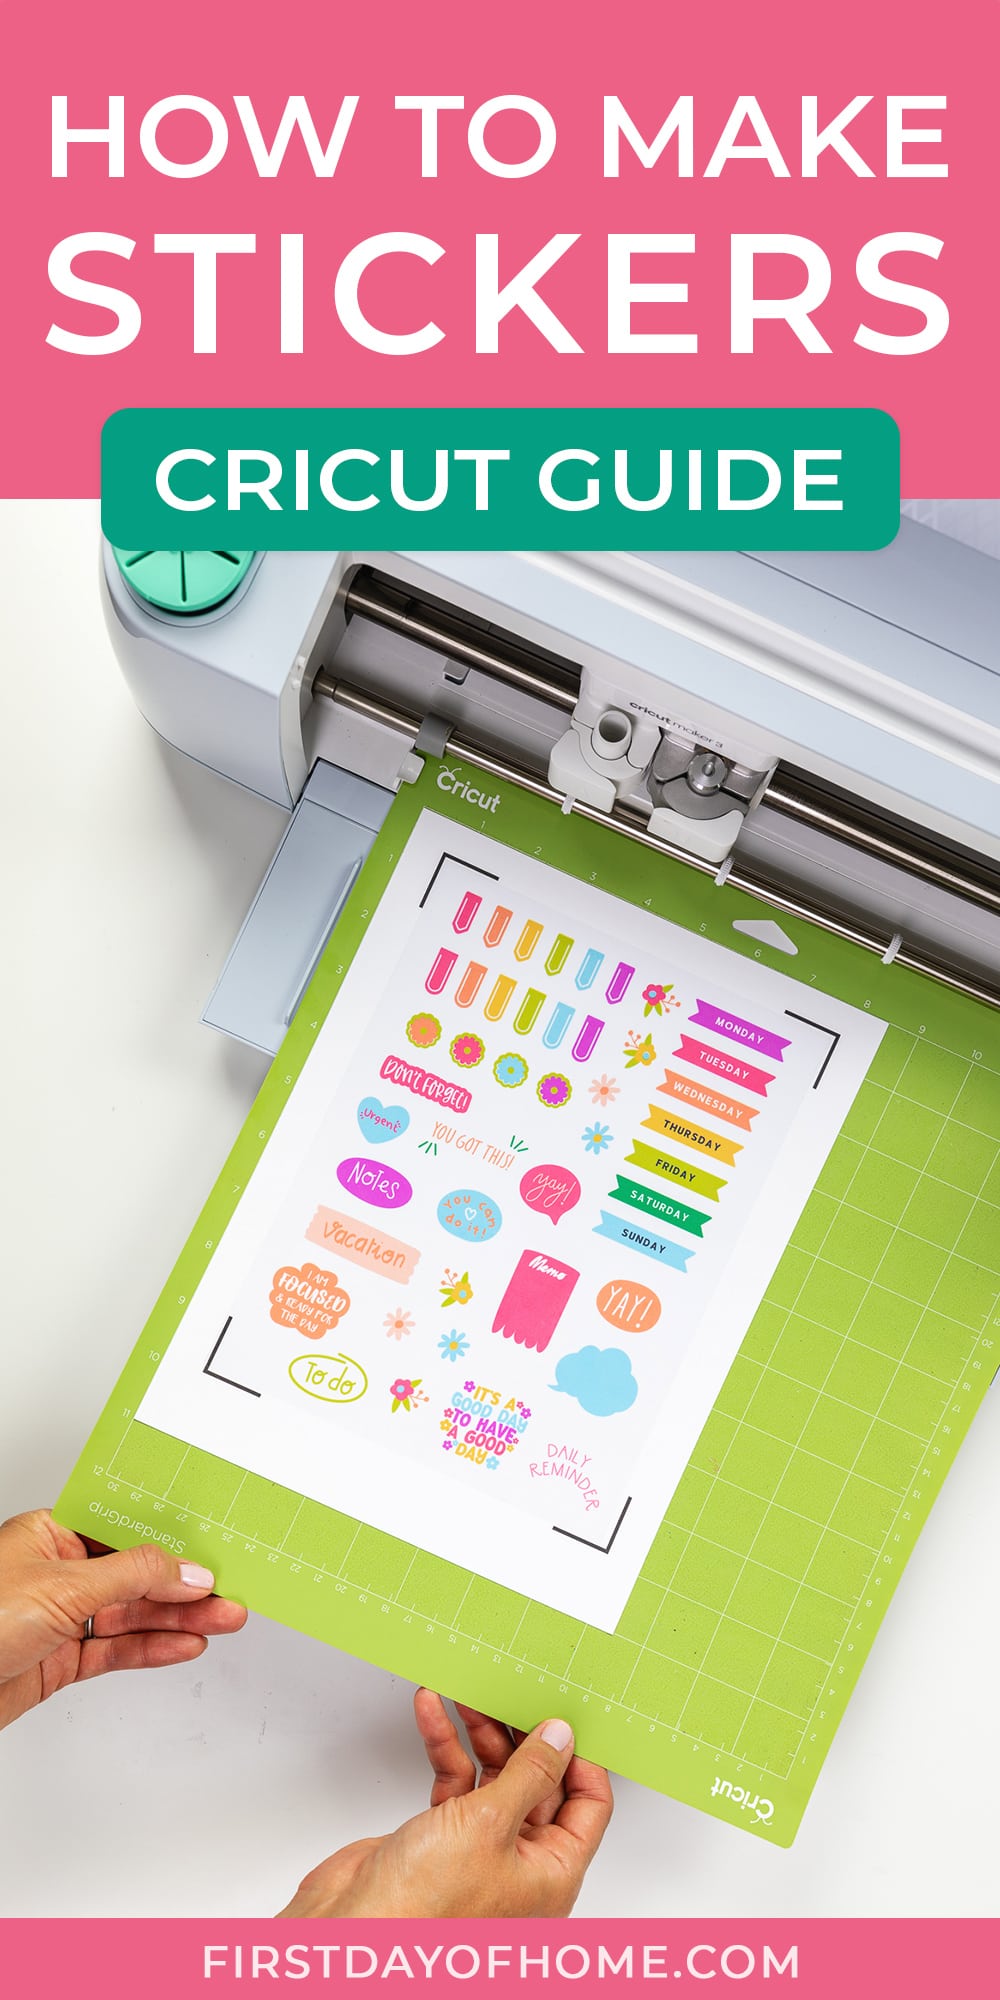 Cricut Maker cutting stickers with text overlay reading "How to Make Stickers Cricut Guide"